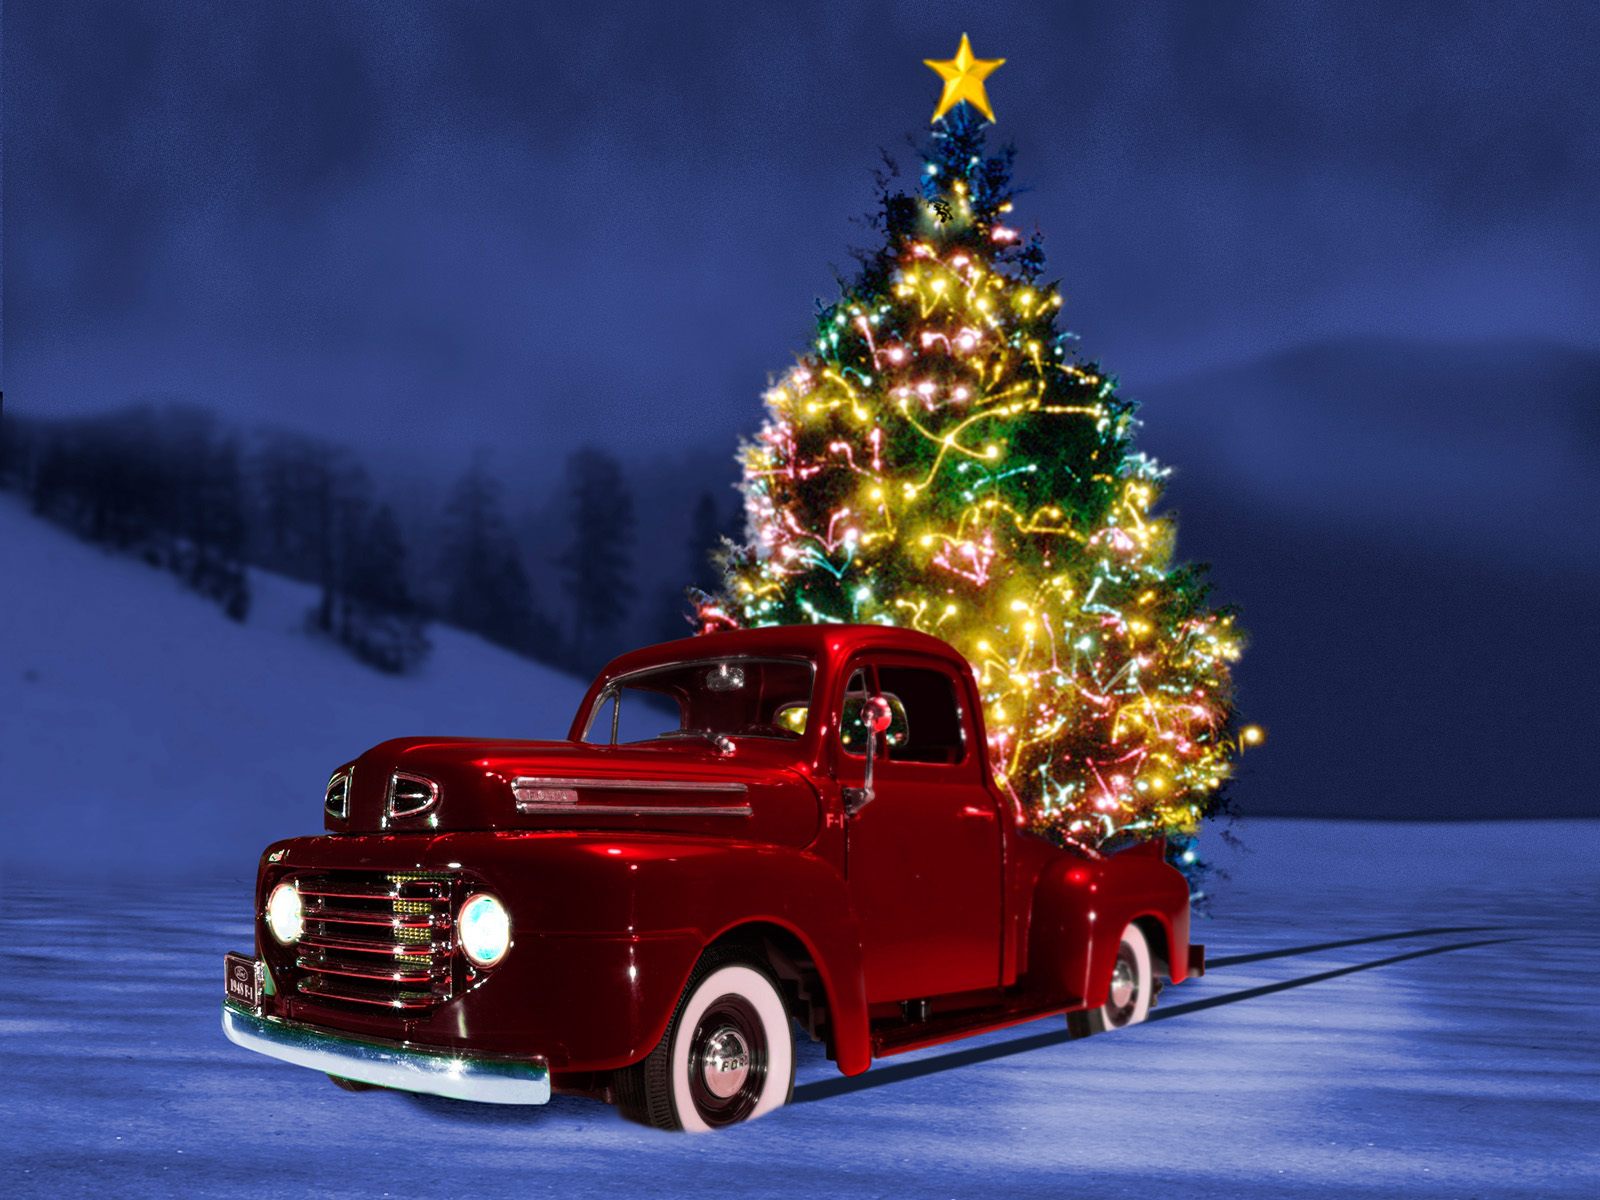 Christmas Tree / Christmas wallpapers and images - wallpapers, pictures ...